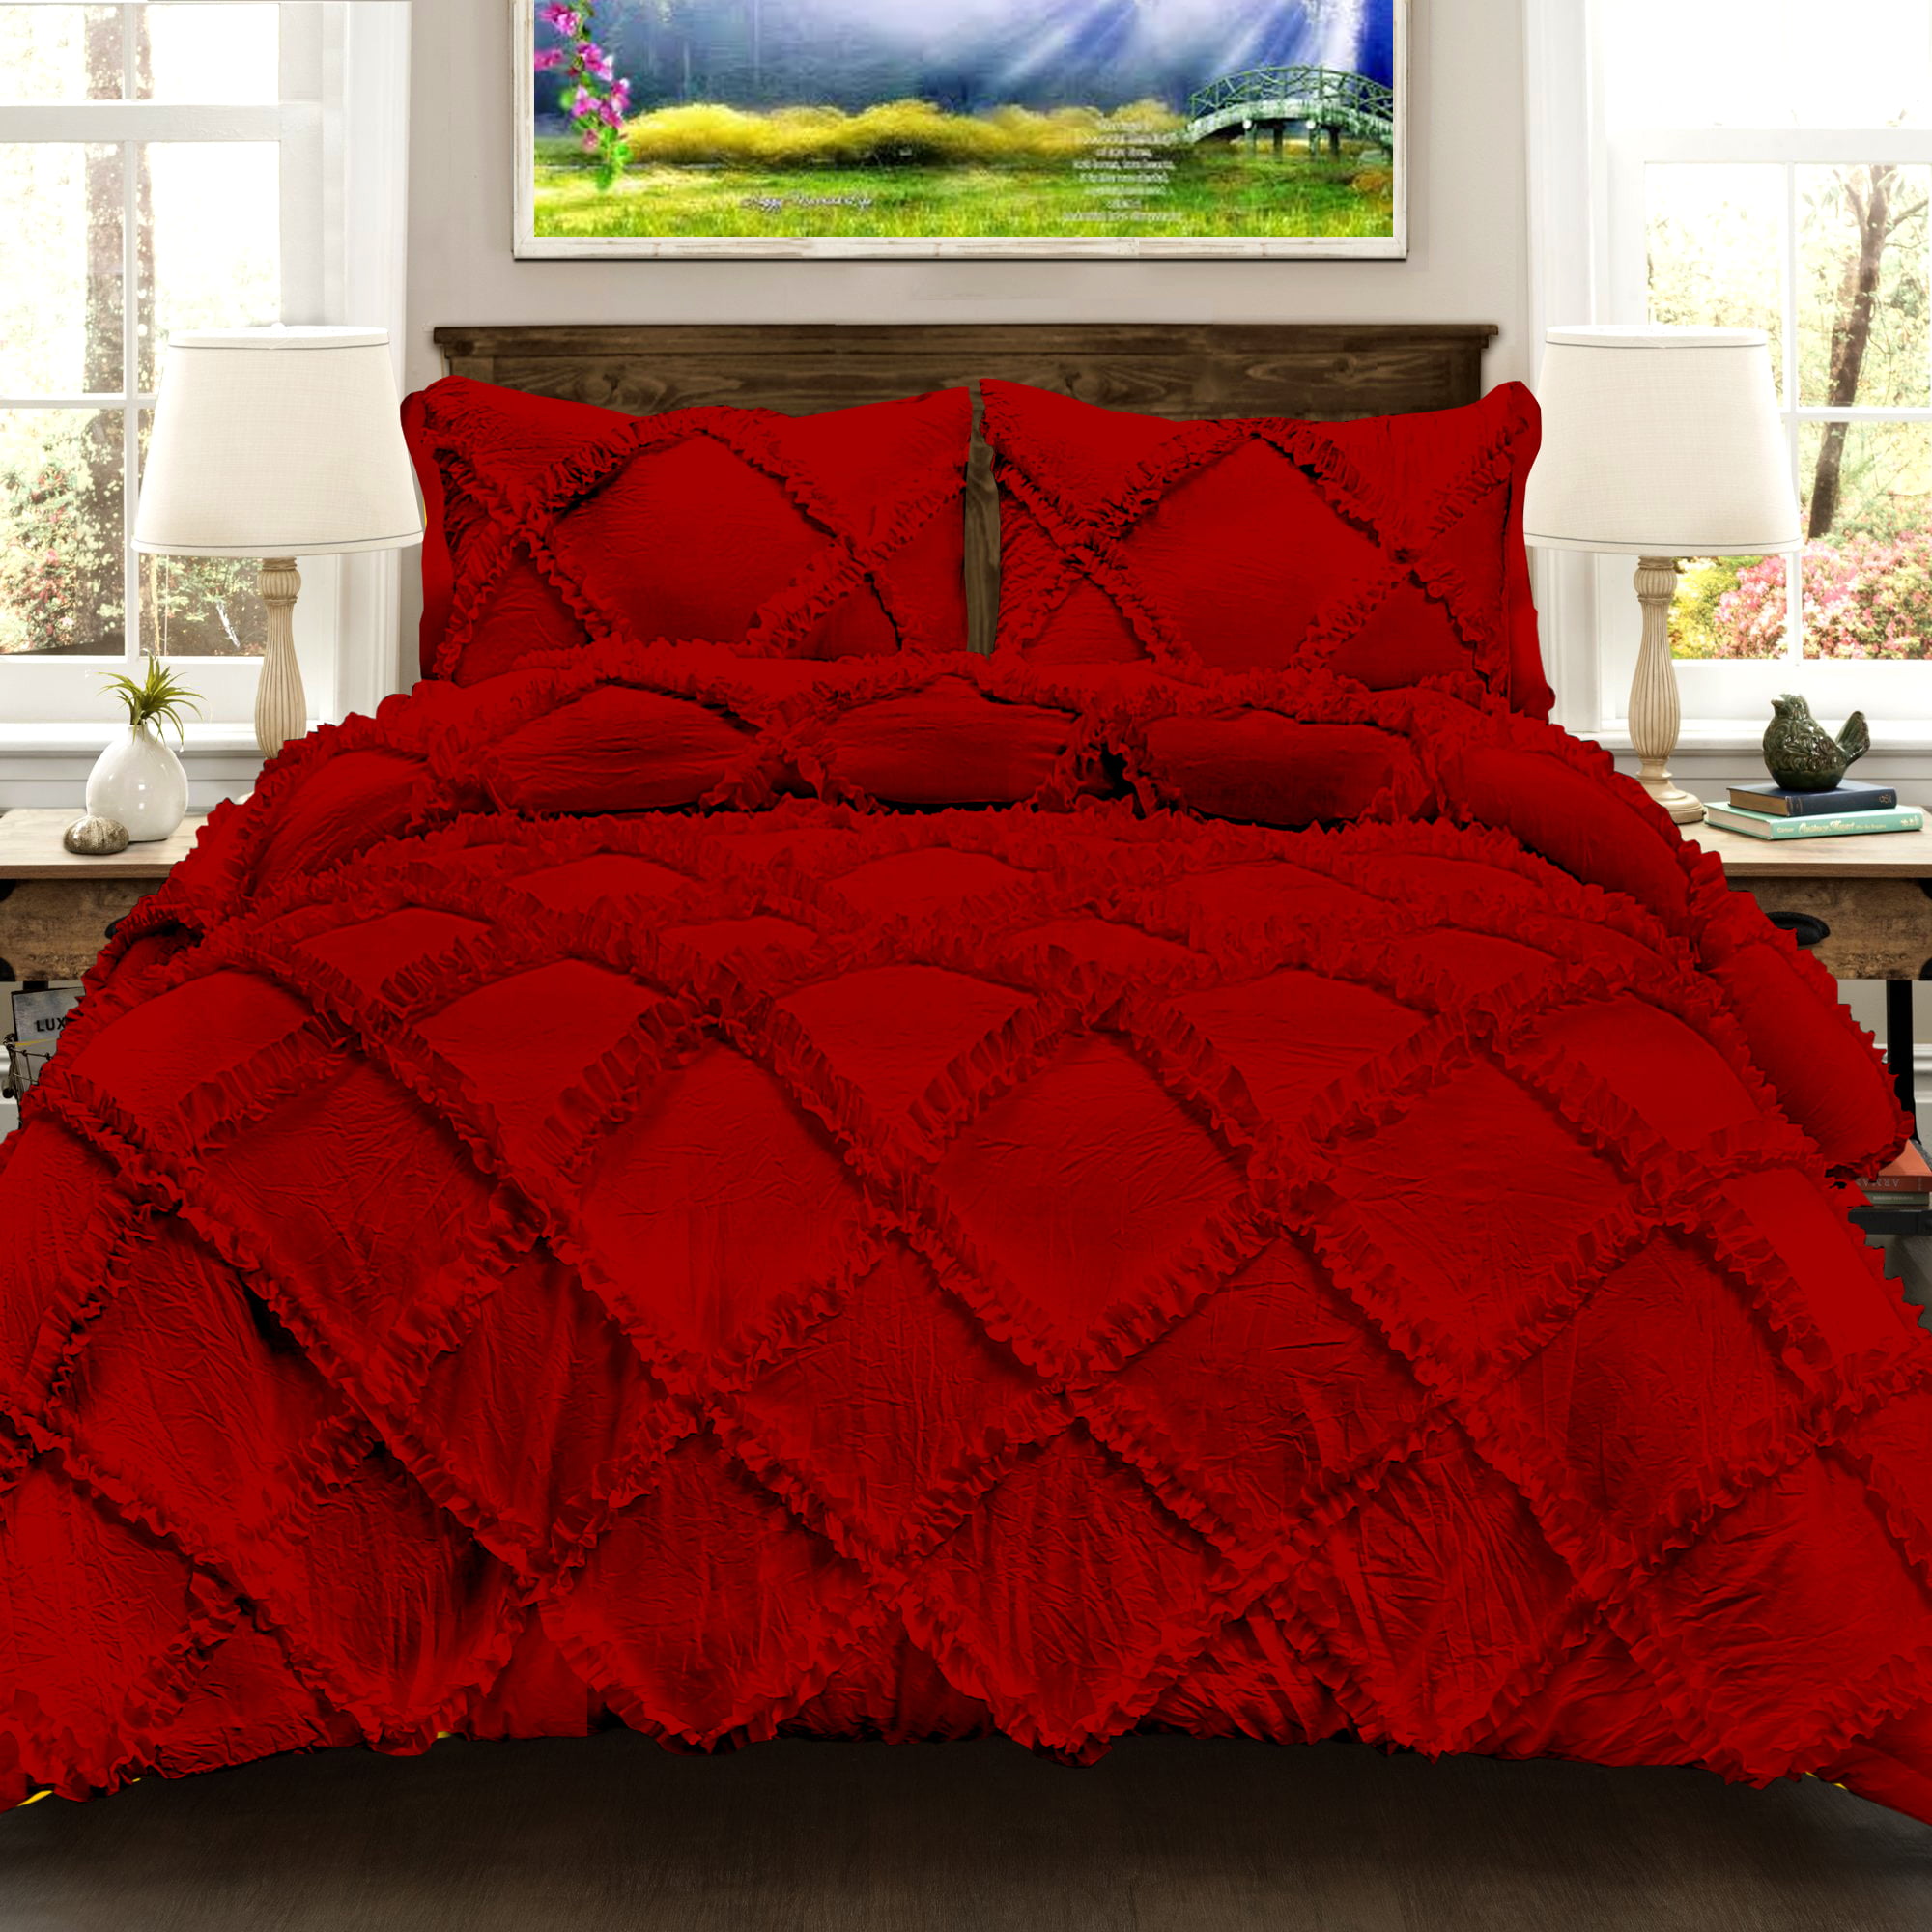 Solid Blood Red King California, Ruffle Duvet Cover King